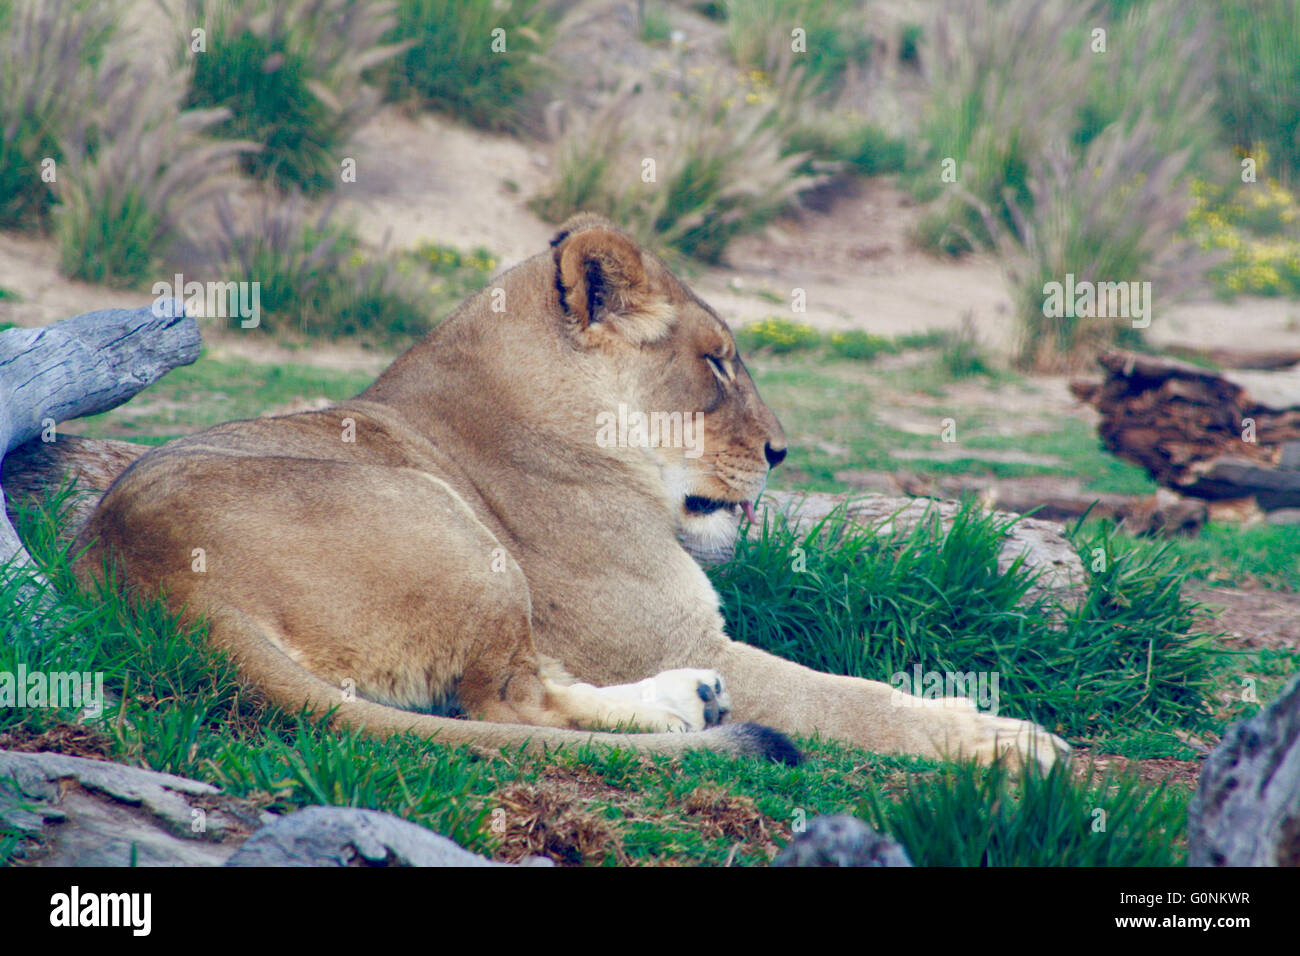 Lioness Sleeping in Grass Stock Photo